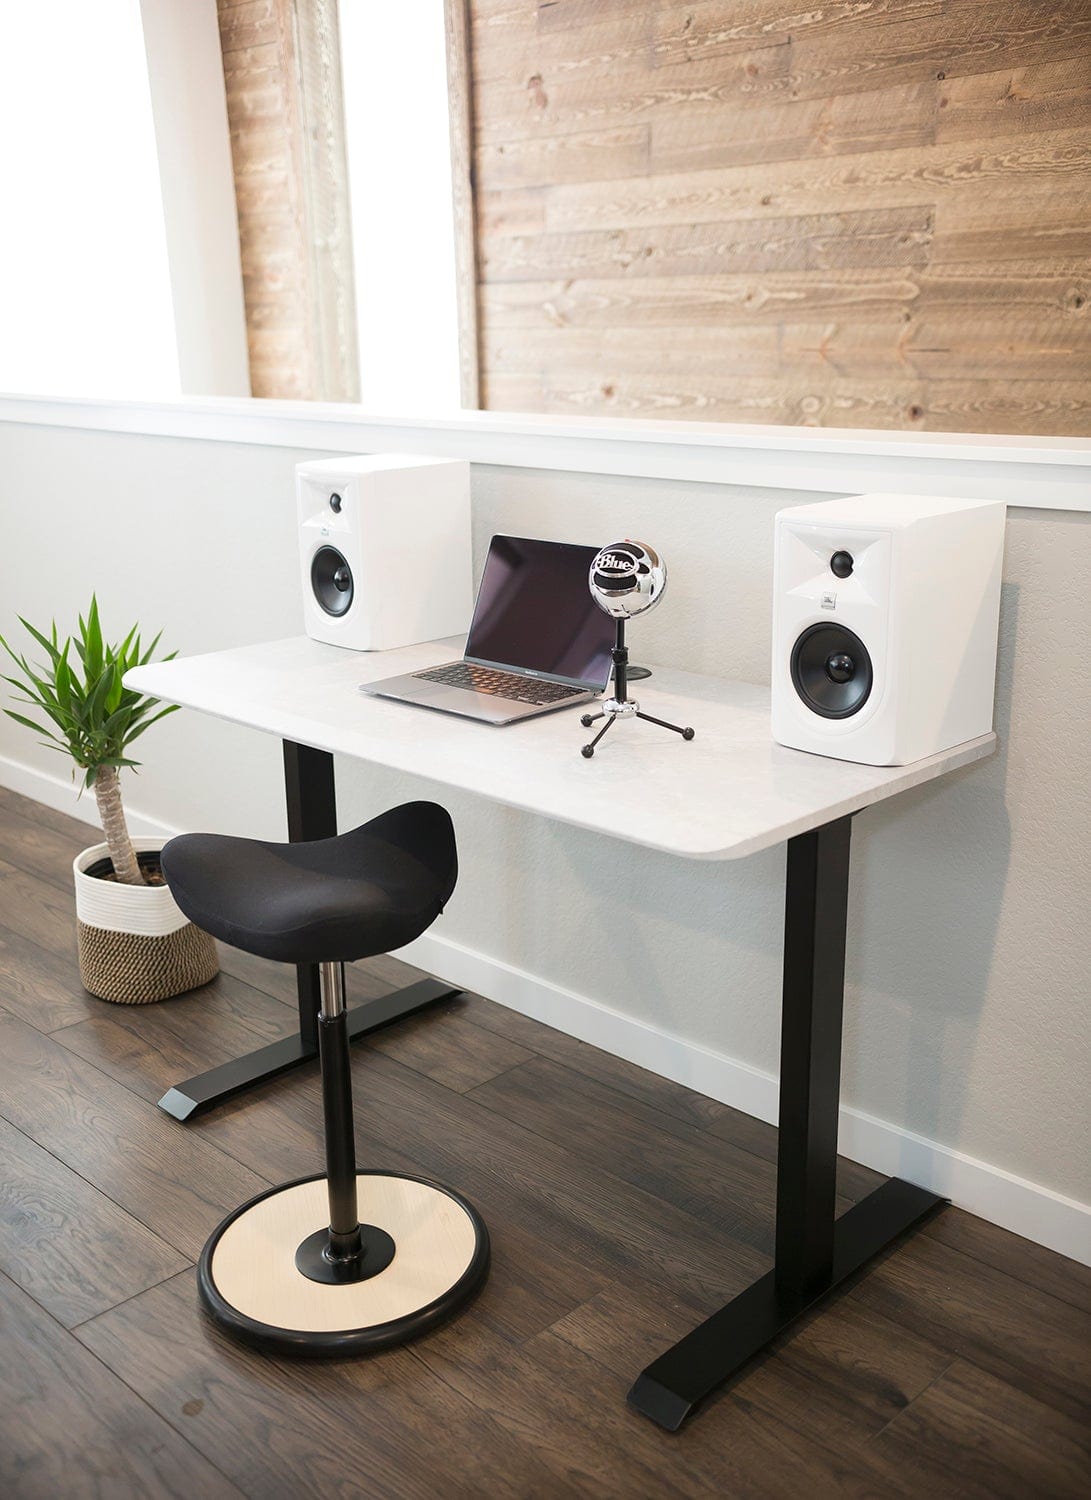 48x24 White Side Table Fixed Height Desk in a home offic with speakers, podcast microphone, laptop, and black stool